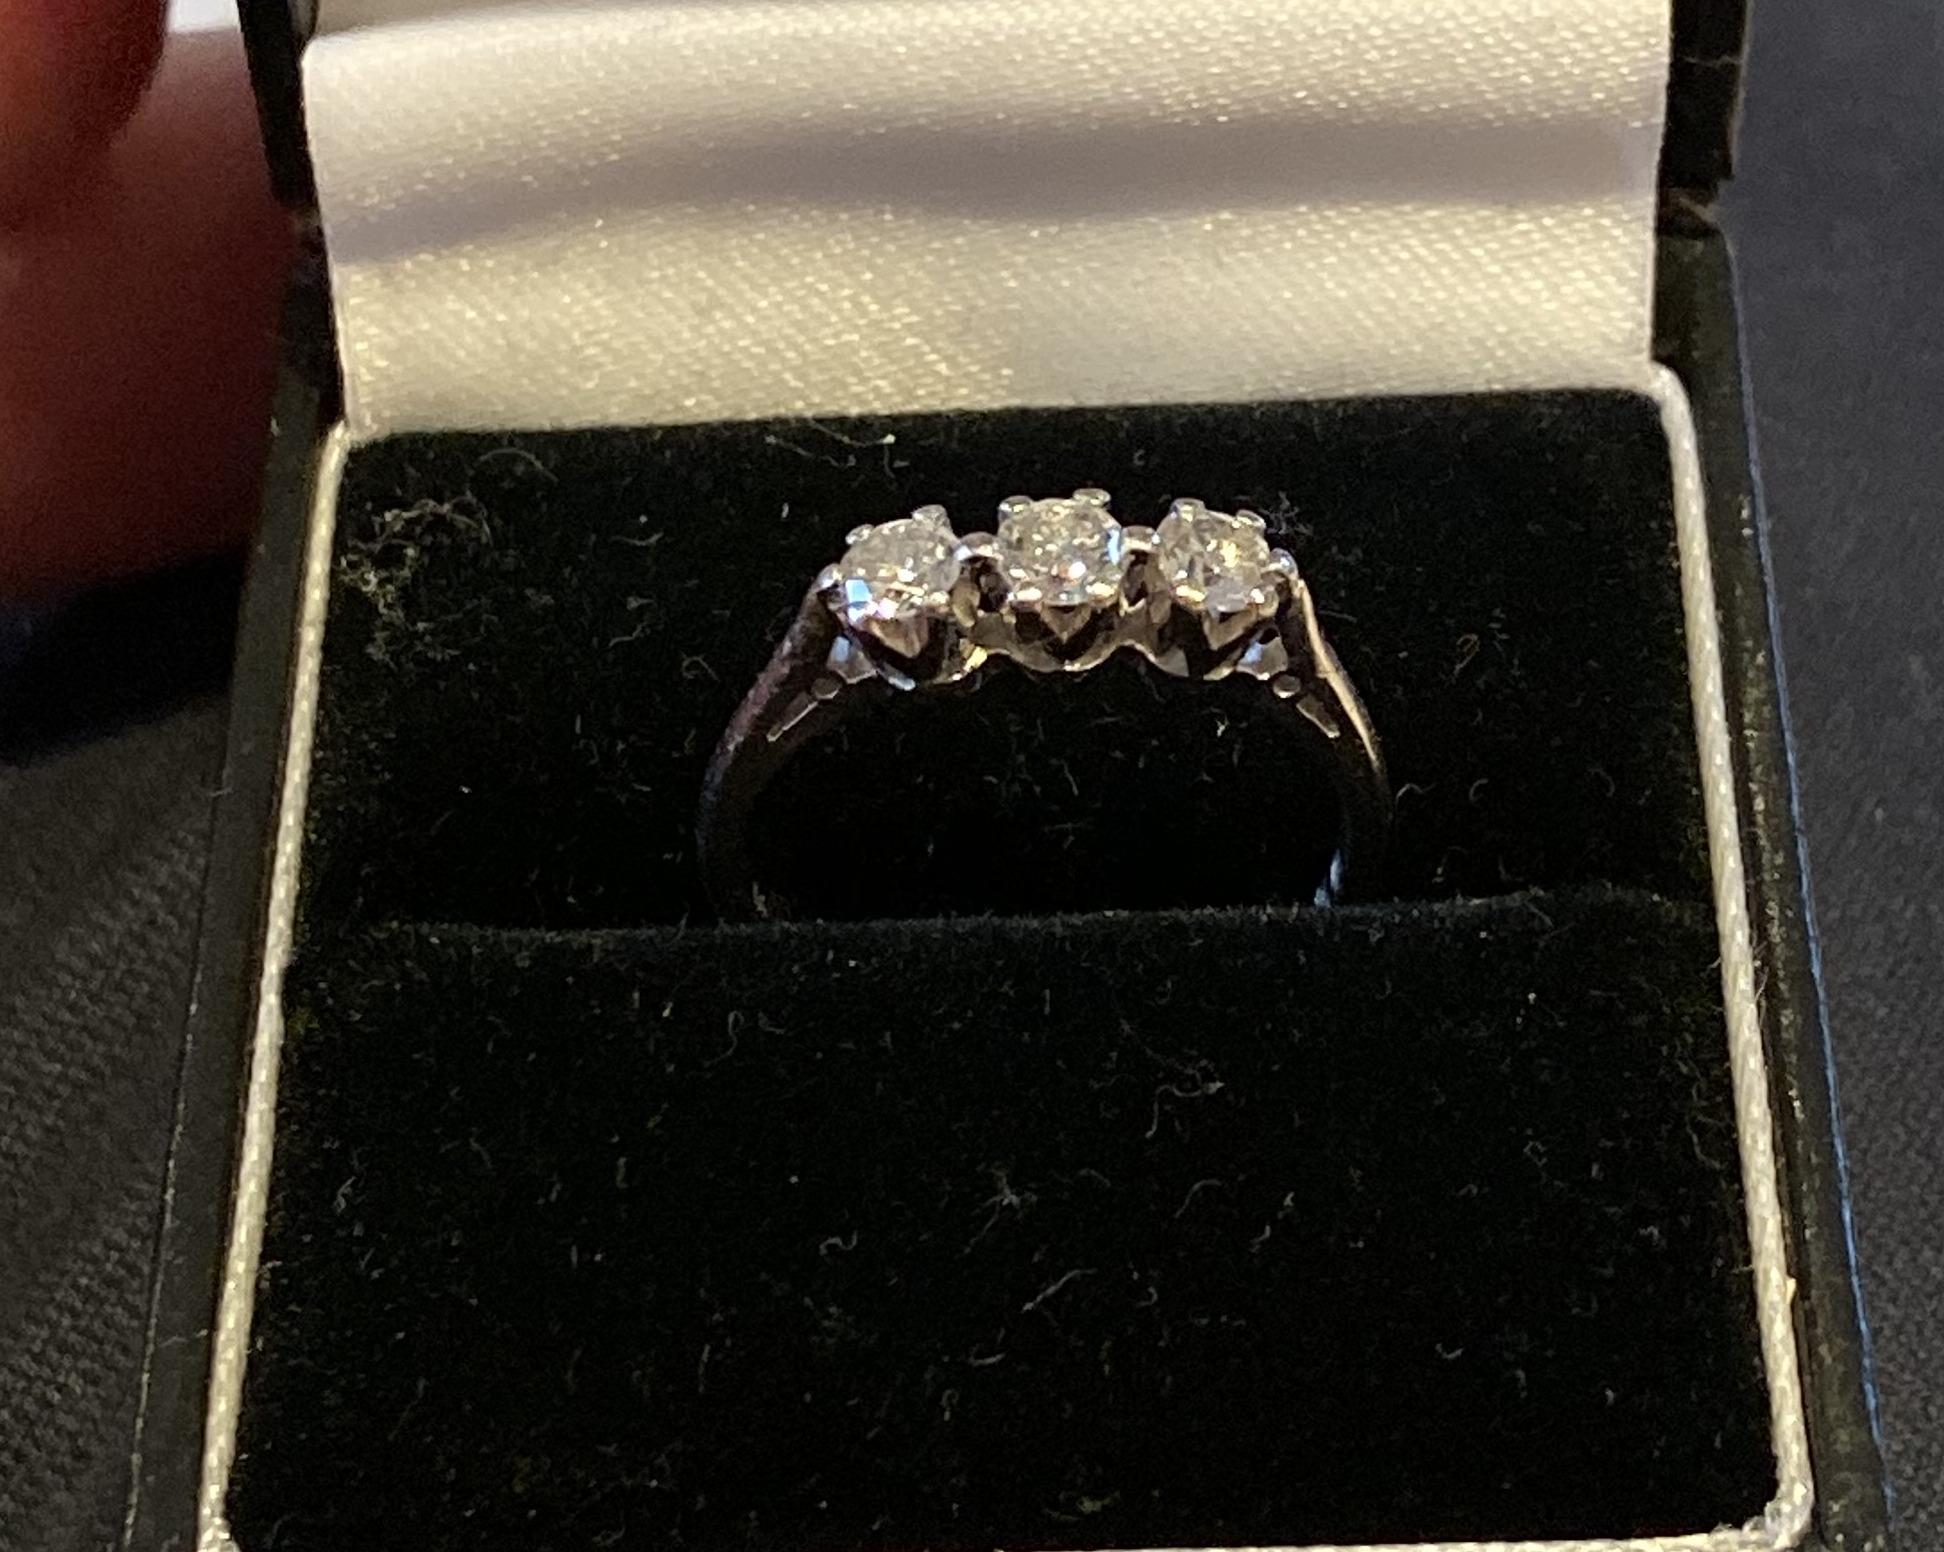 We are delighted to offer for sale this Stunning Sheffield made Millennium platinum 3 stone 0.61ct diamond ring in a six claw platinum 950 setting

A very good looking ring with bright clear diamonds, this would be ideal as an engagement or eternity